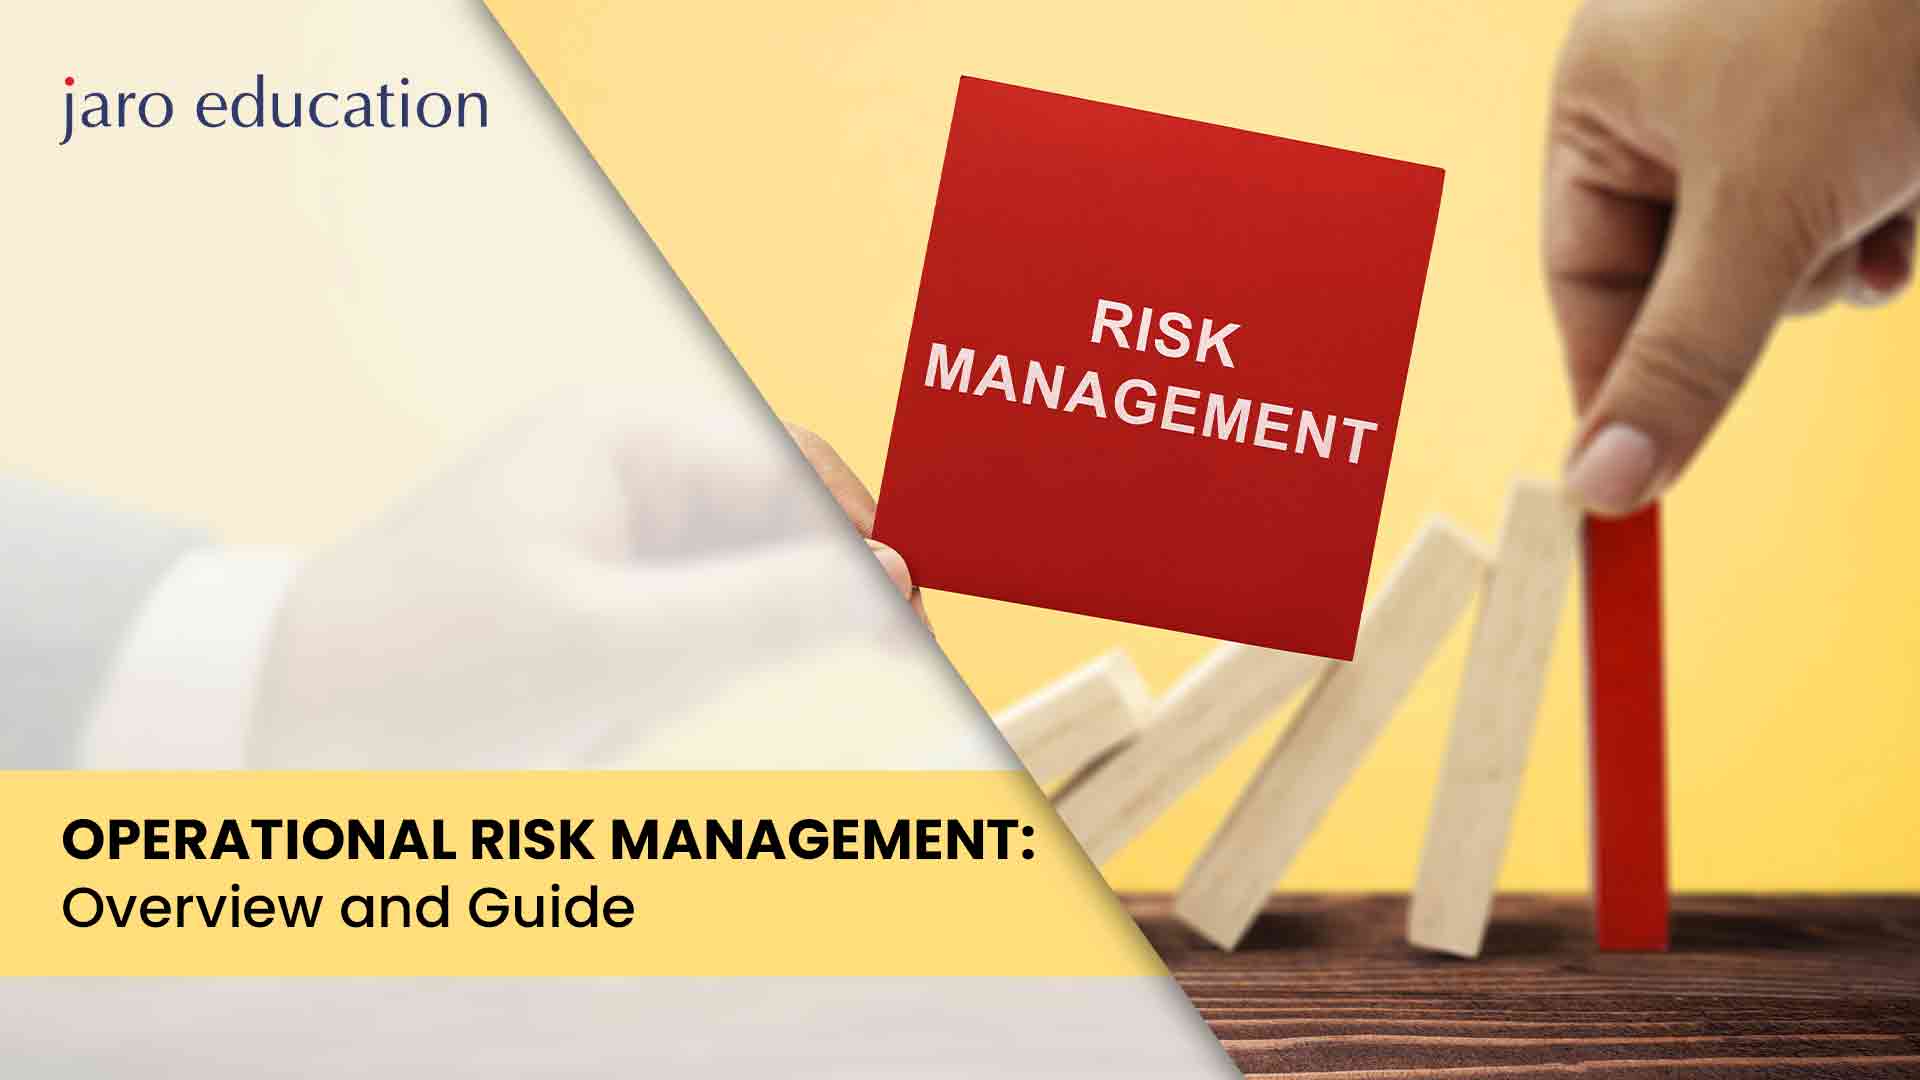 Operational Risk Management Overview and Guide